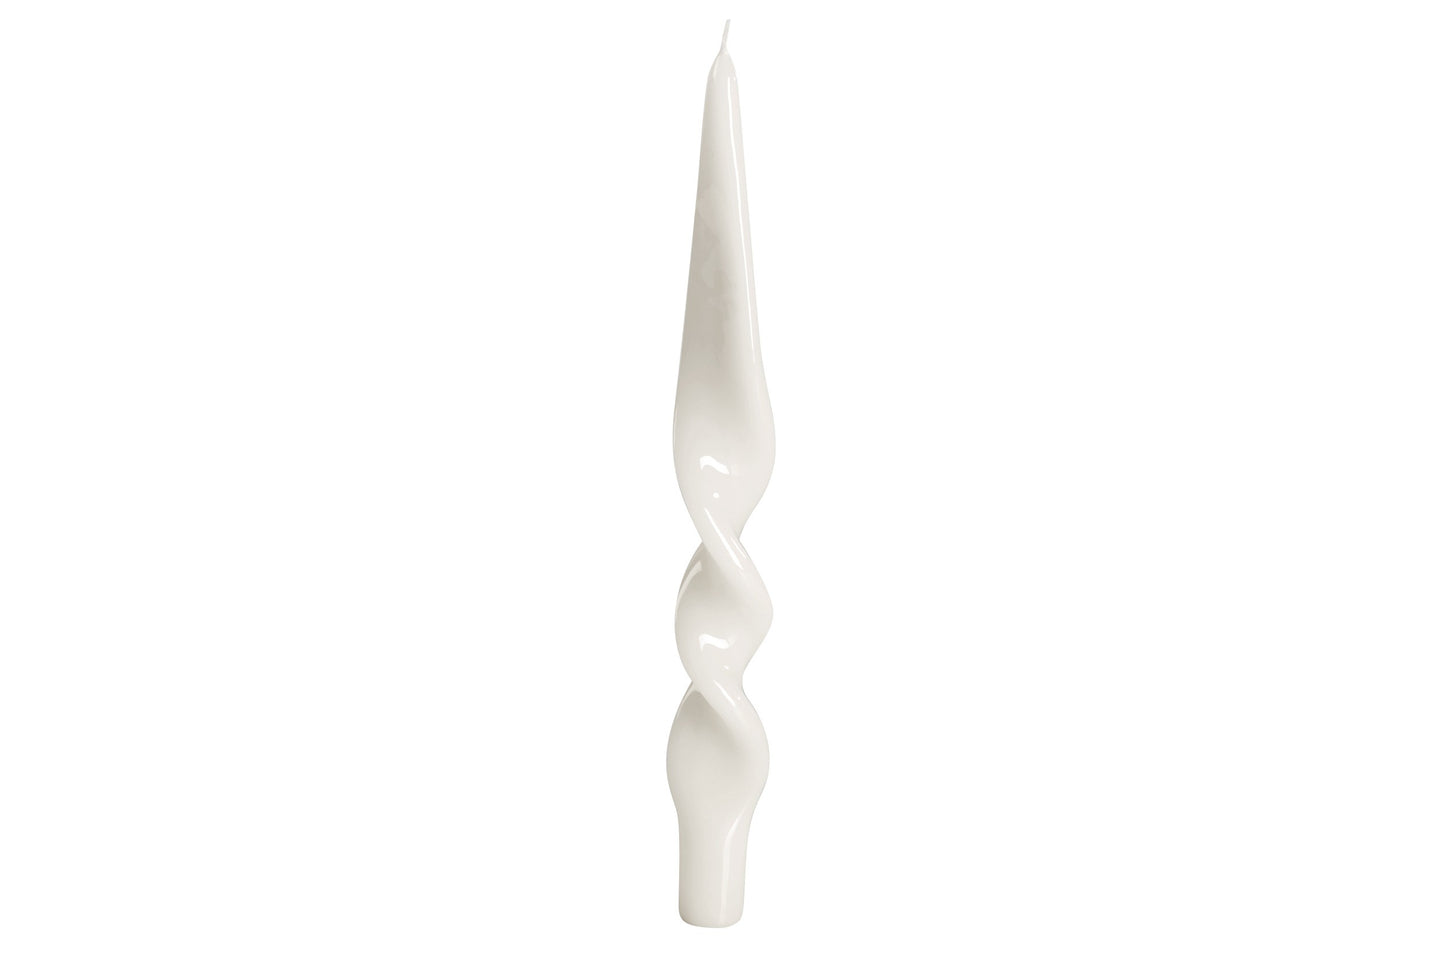 Twisted Taper Candles, Set of 2-White